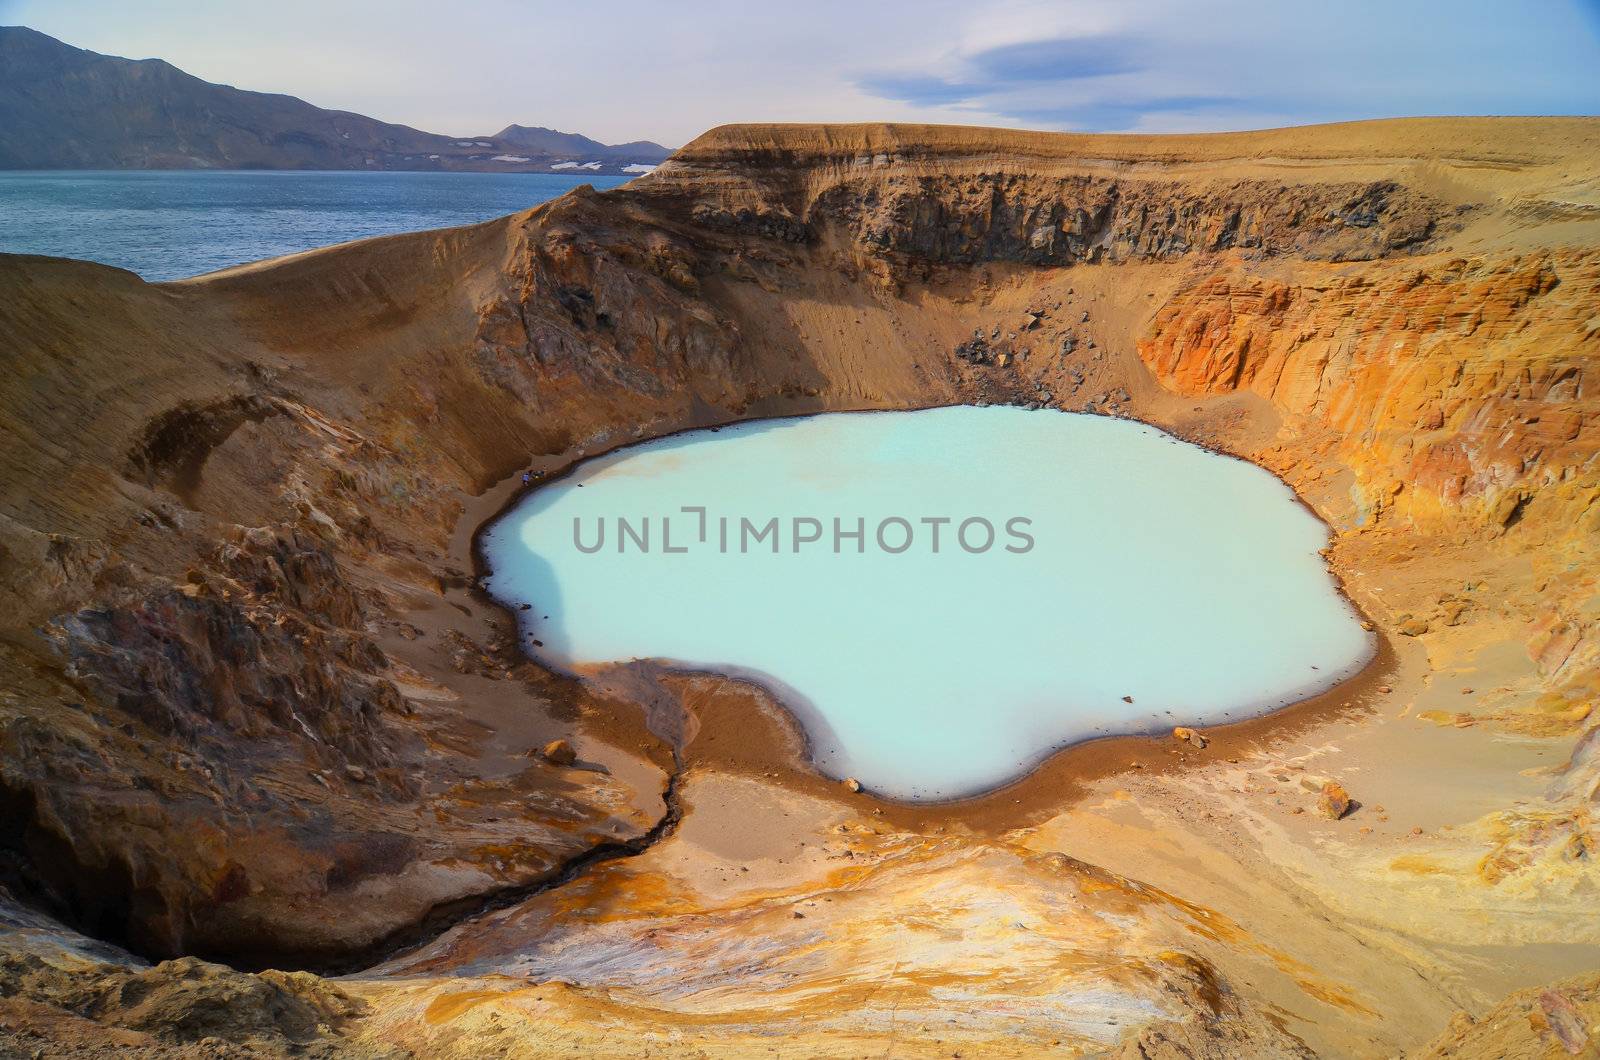 View of Viti crater, Askja, Iceland by martinm303